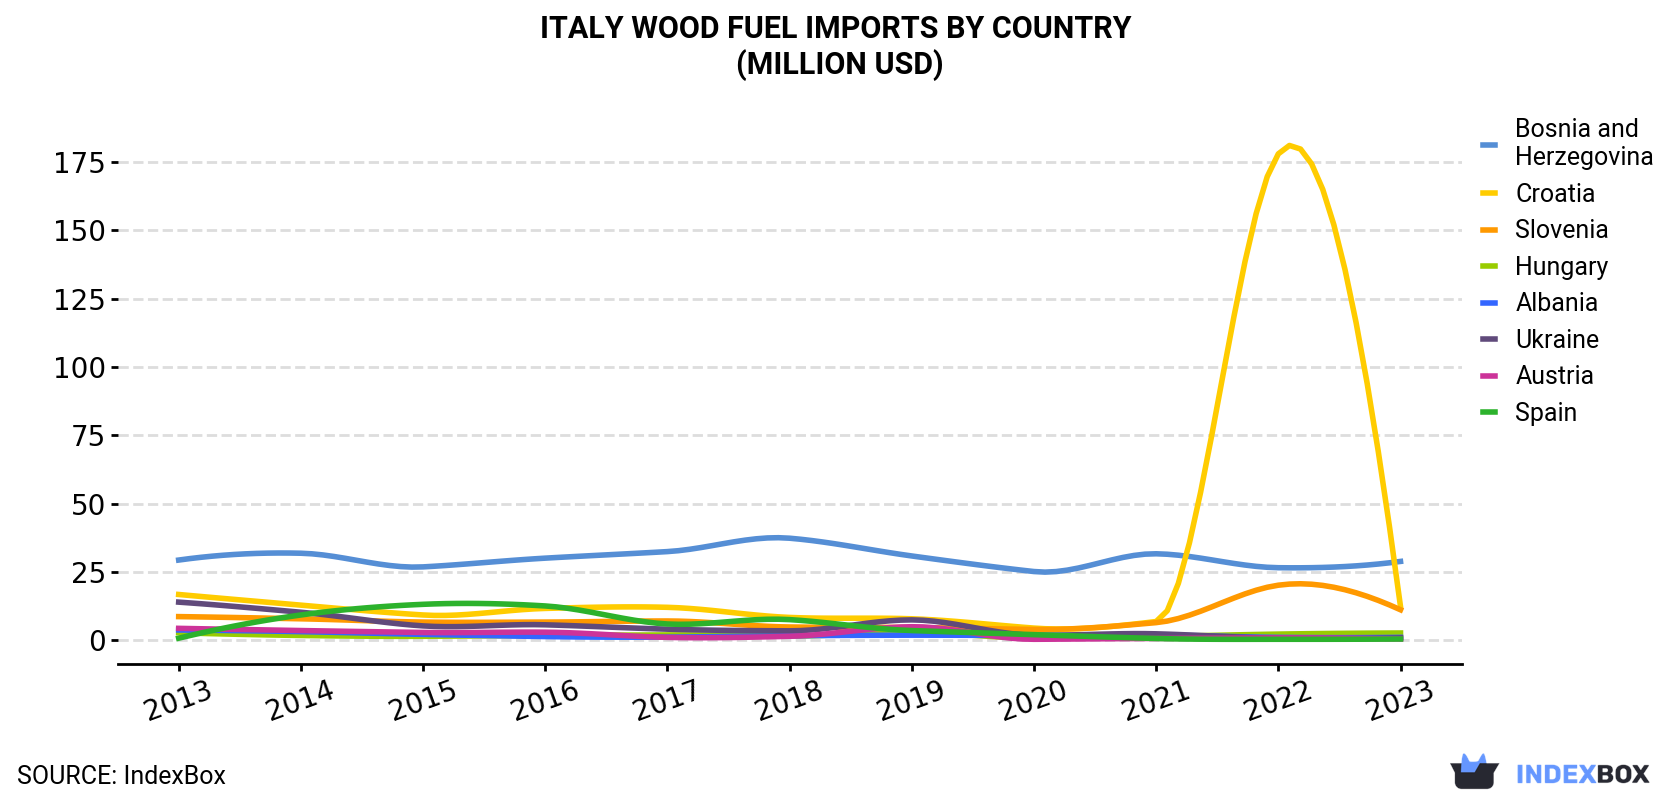 Italy Wood Fuel Imports By Country (Million USD)